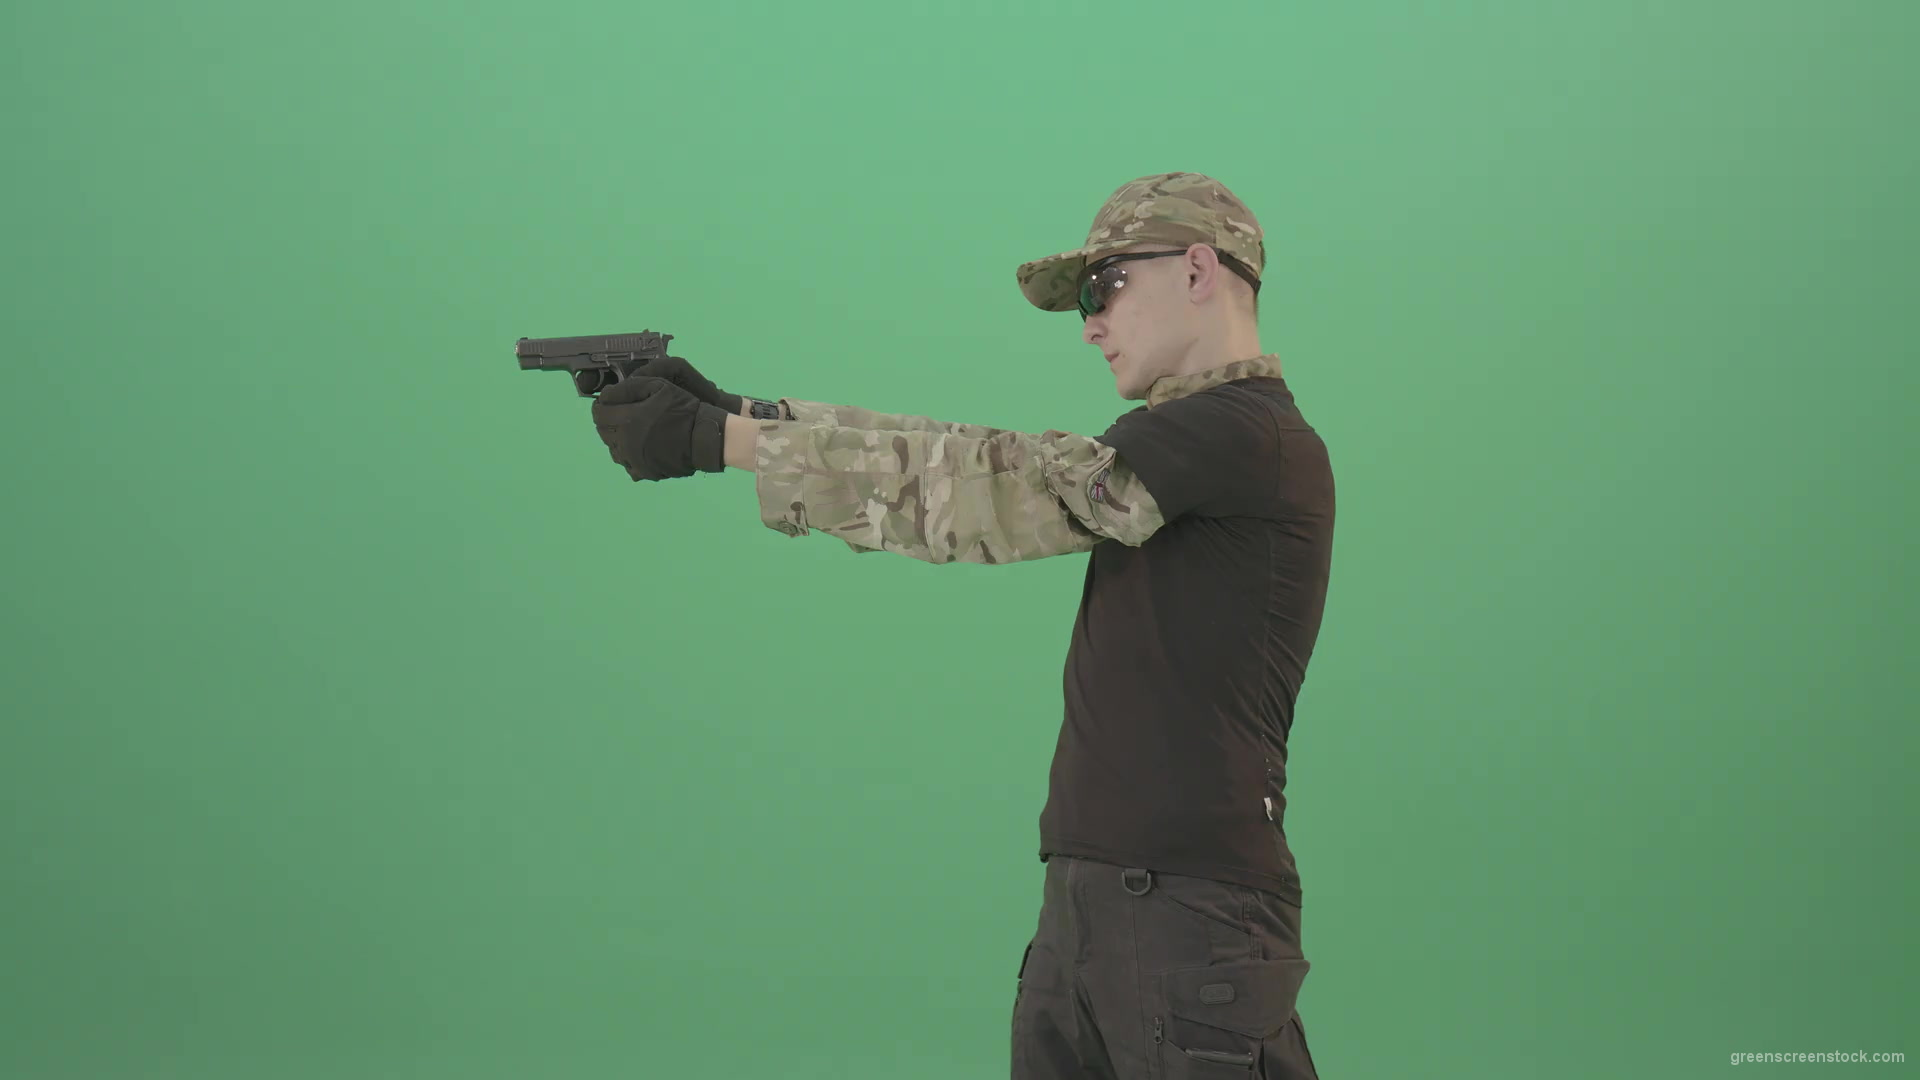 Army-Man-Assassin-shooting-with-small-gun-isolated-on-green-screen-4K-Video-Footage-1920_001 Green Screen Stock